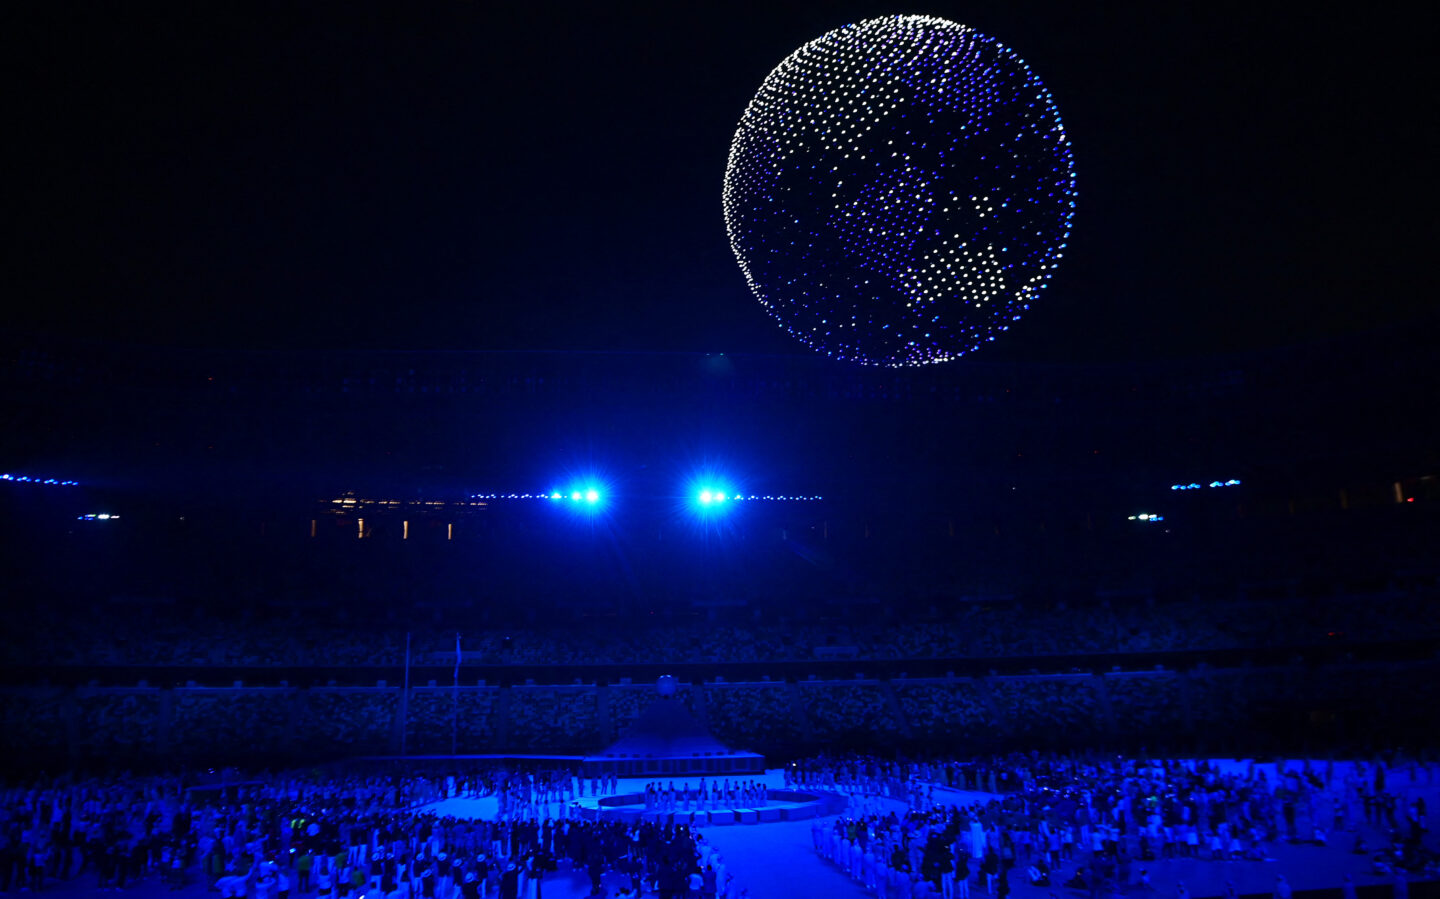 Photograph of drone display at Tokyo Olympics Opening Ceremony